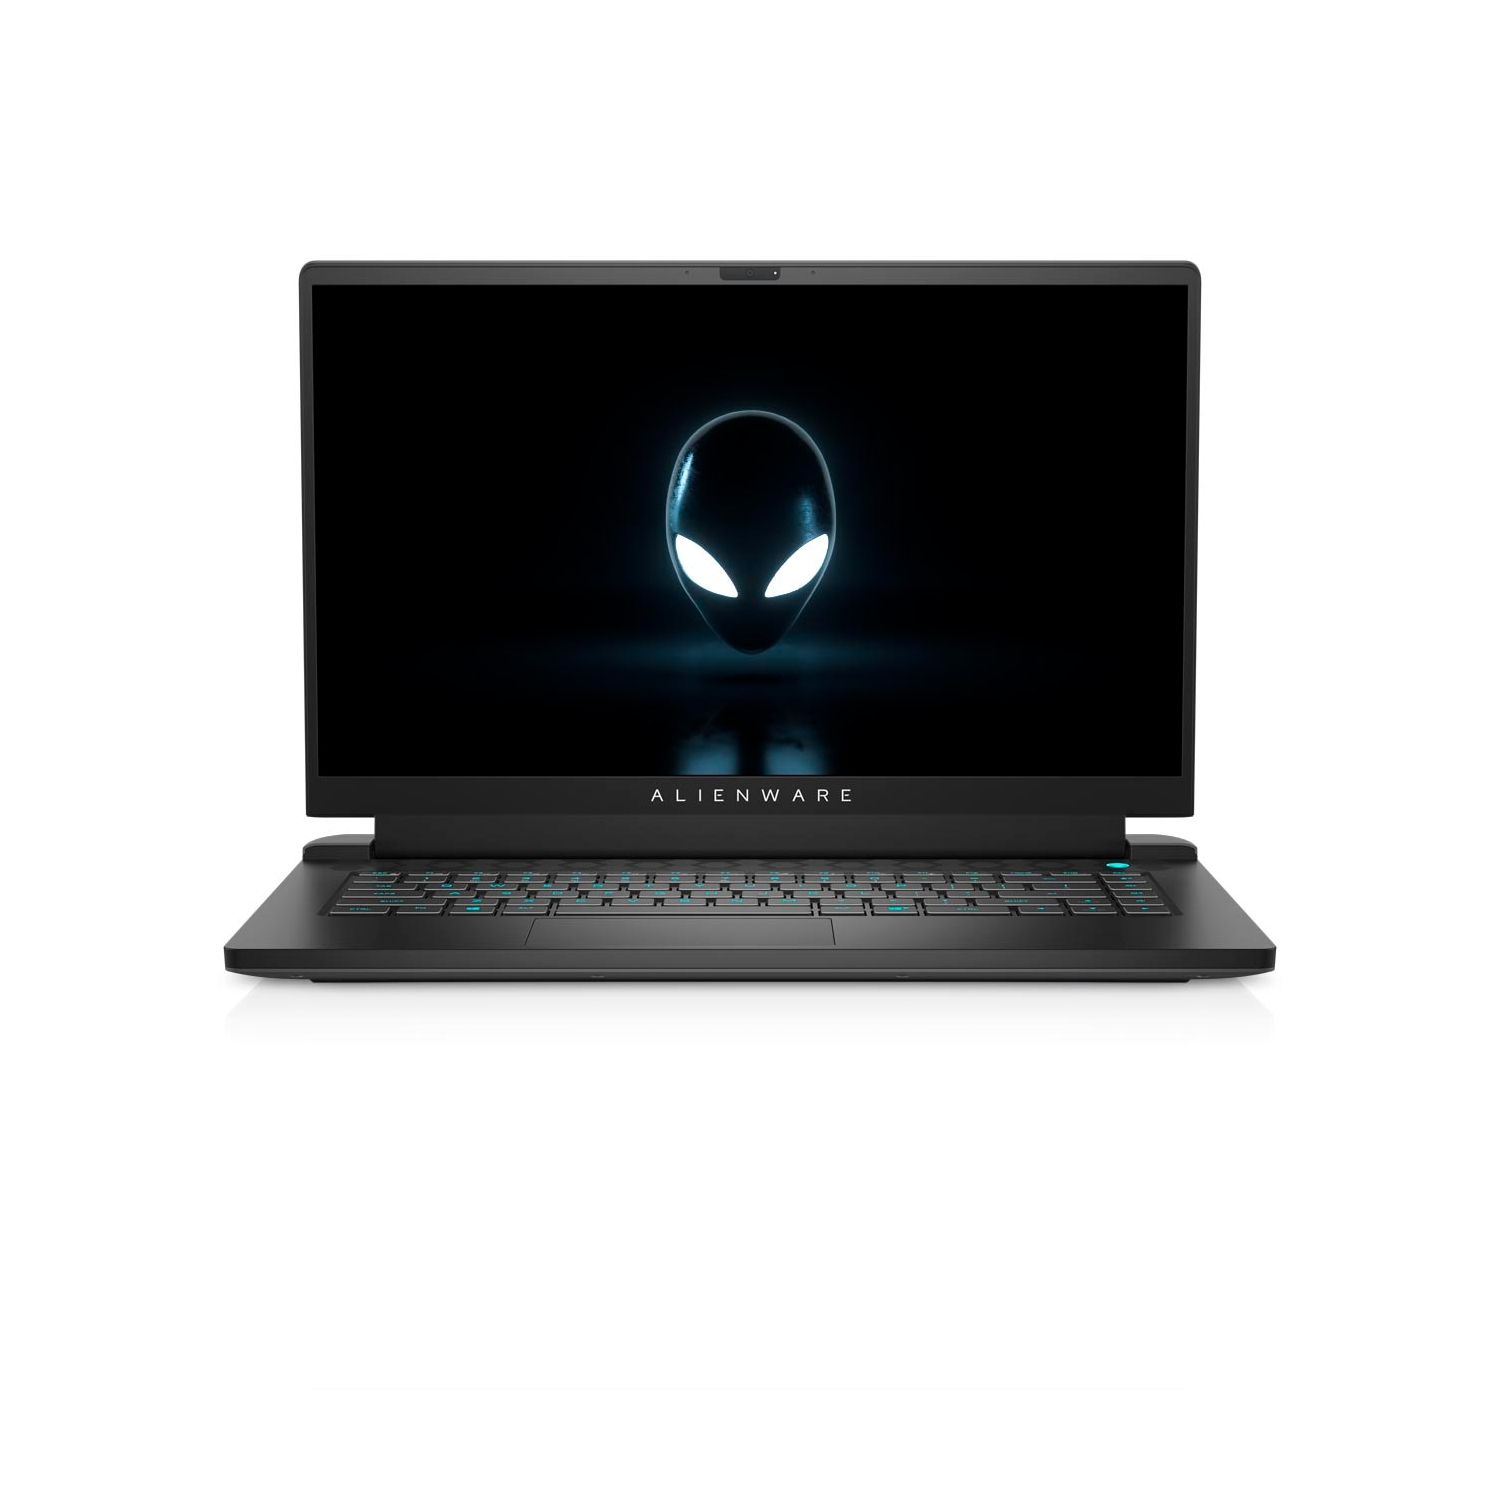 Refurbished (Excellent) - Dell Alienware m15 R5 Ryzen Edition Gaming Laptop (2021), 15.6" FHD, Core Ryzen 9, 512GB SSD, 32GB RAM, RTX 3070, 8 Cores @ 4.6 GHz Certified